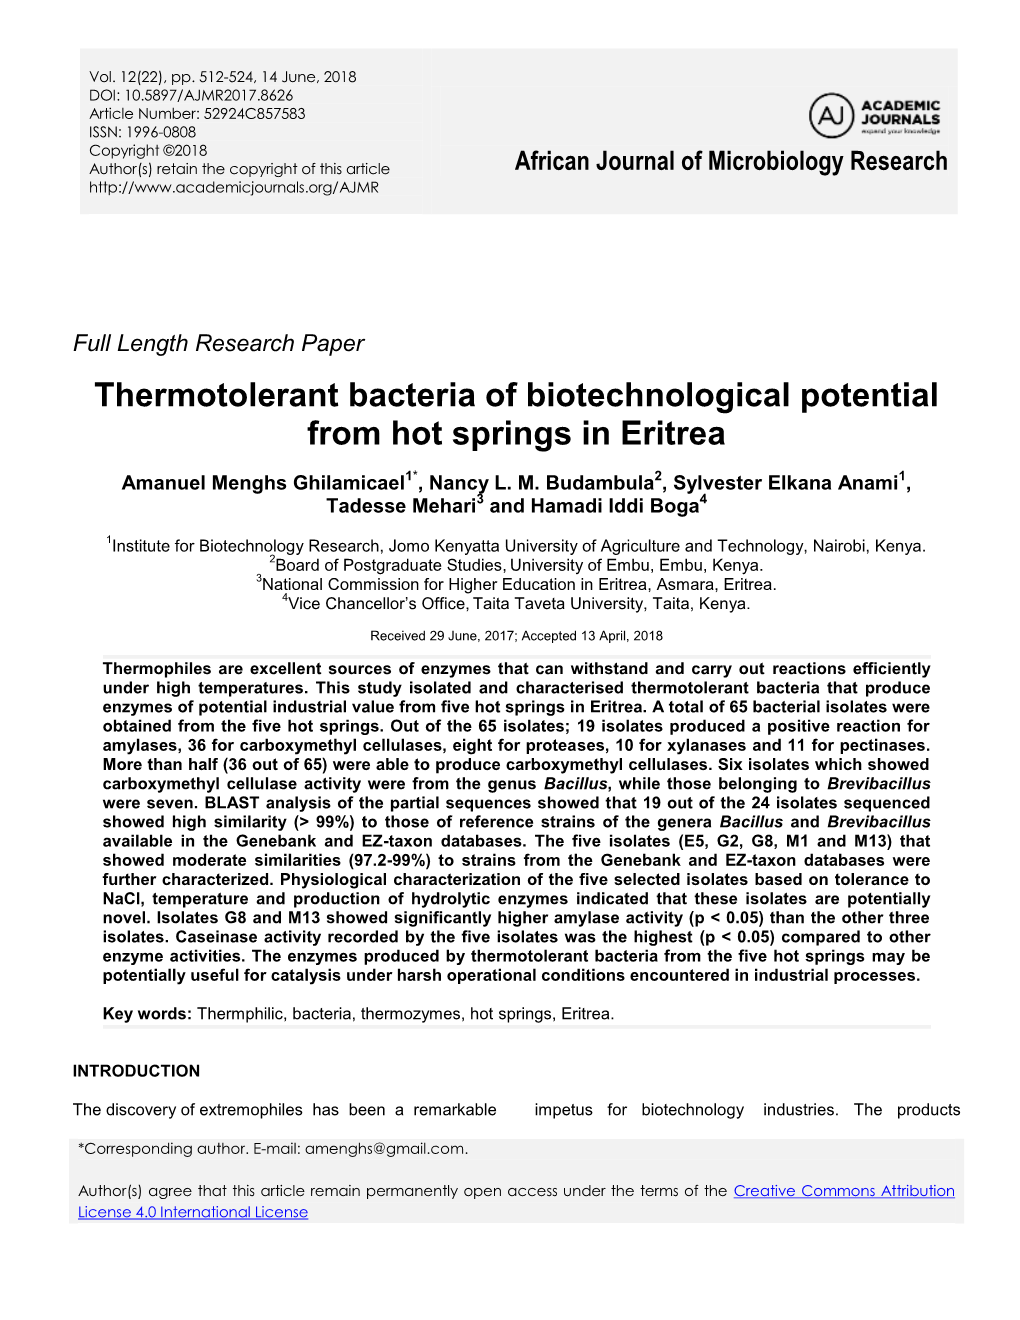 Thermotolerant Bacteria of Biotechnological Potential from Hot Springs in Eritrea